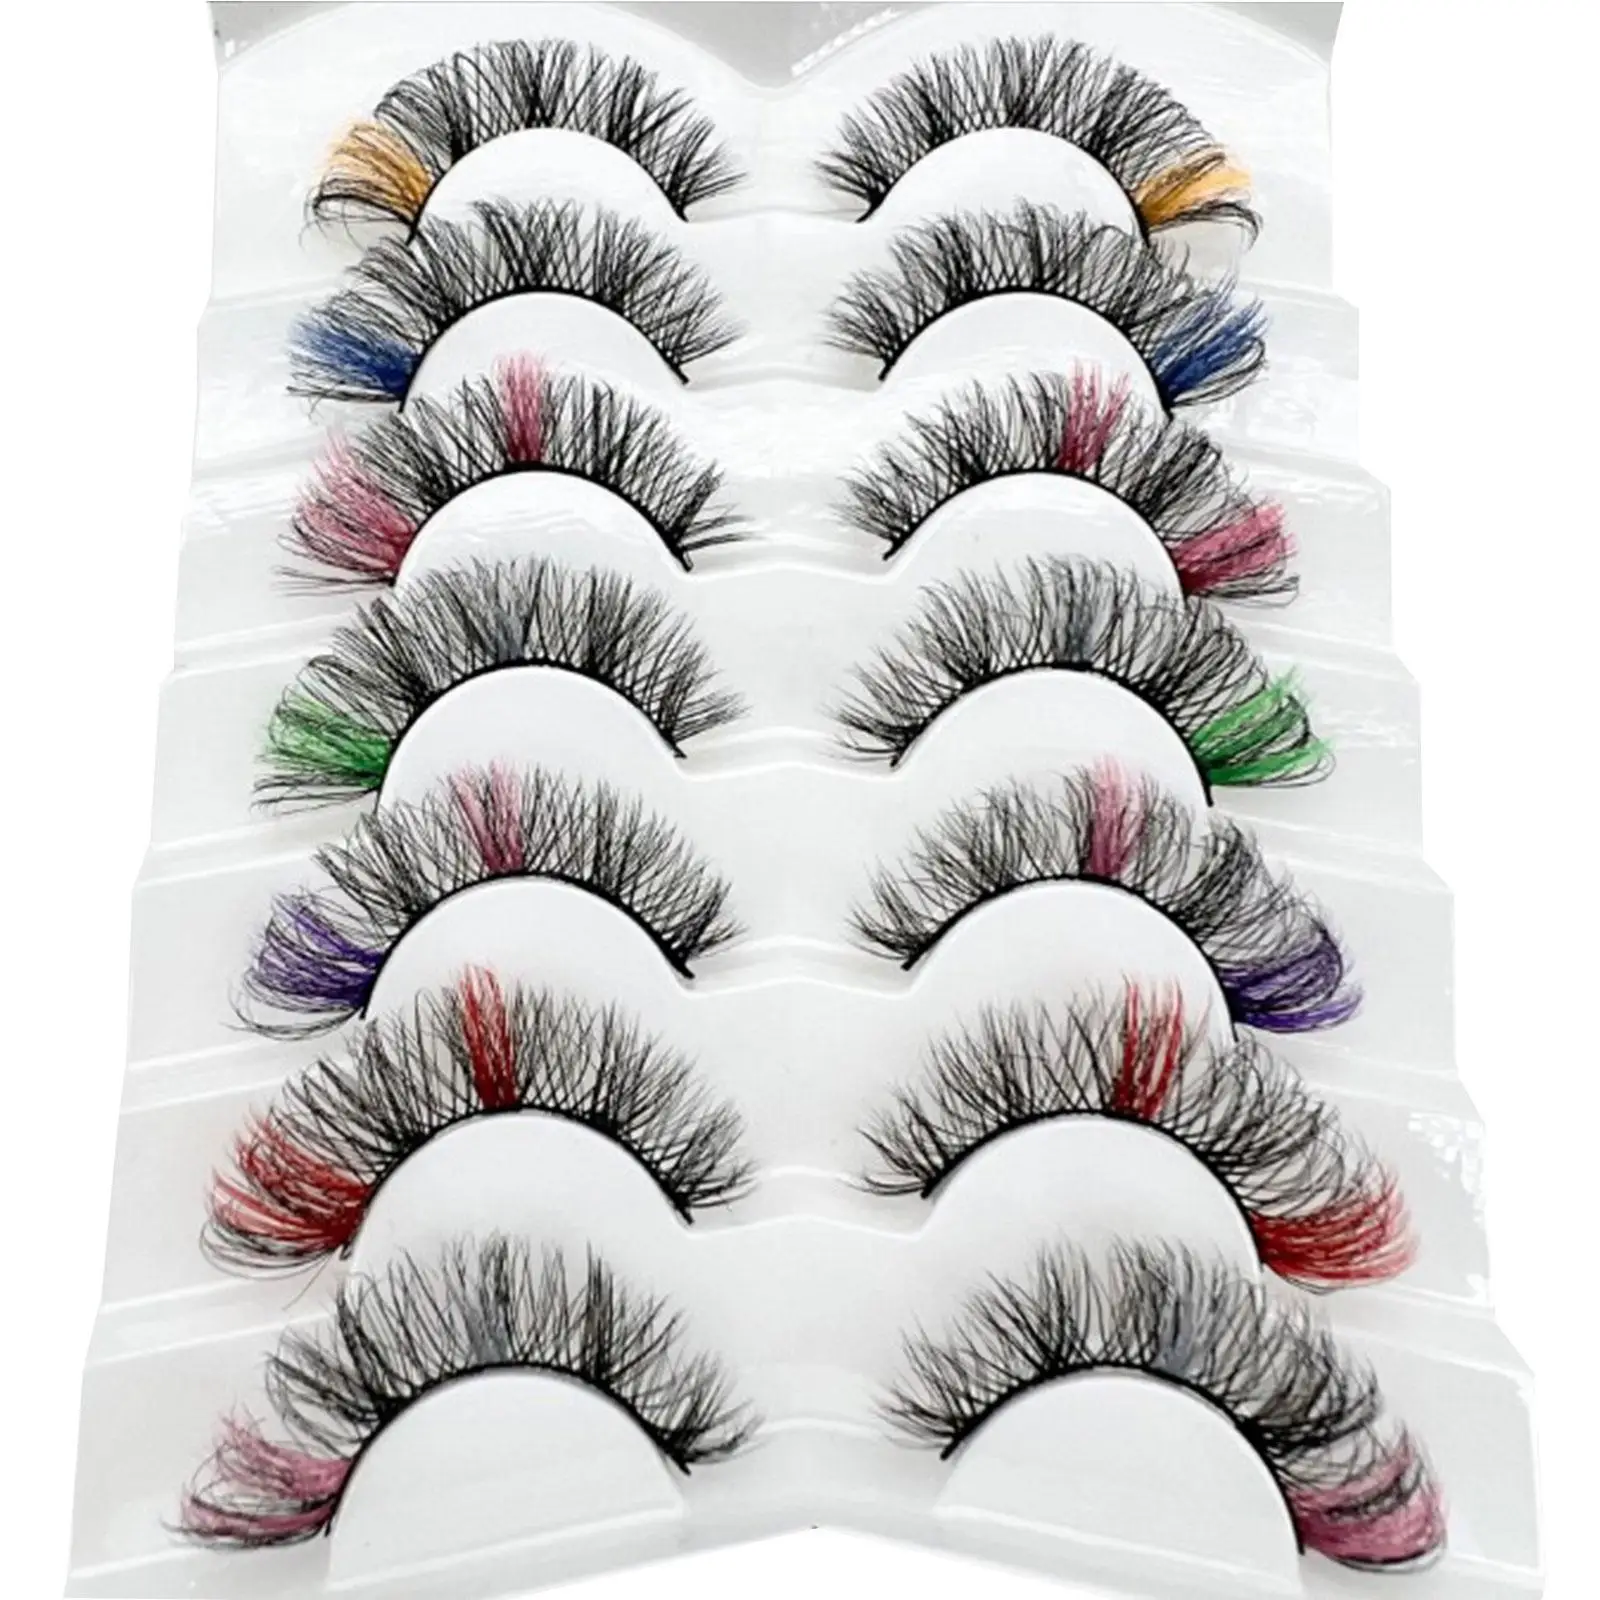 14Pcs Colored Eyelashes Makeup Eyelash Extension Soft for Costumes Parties